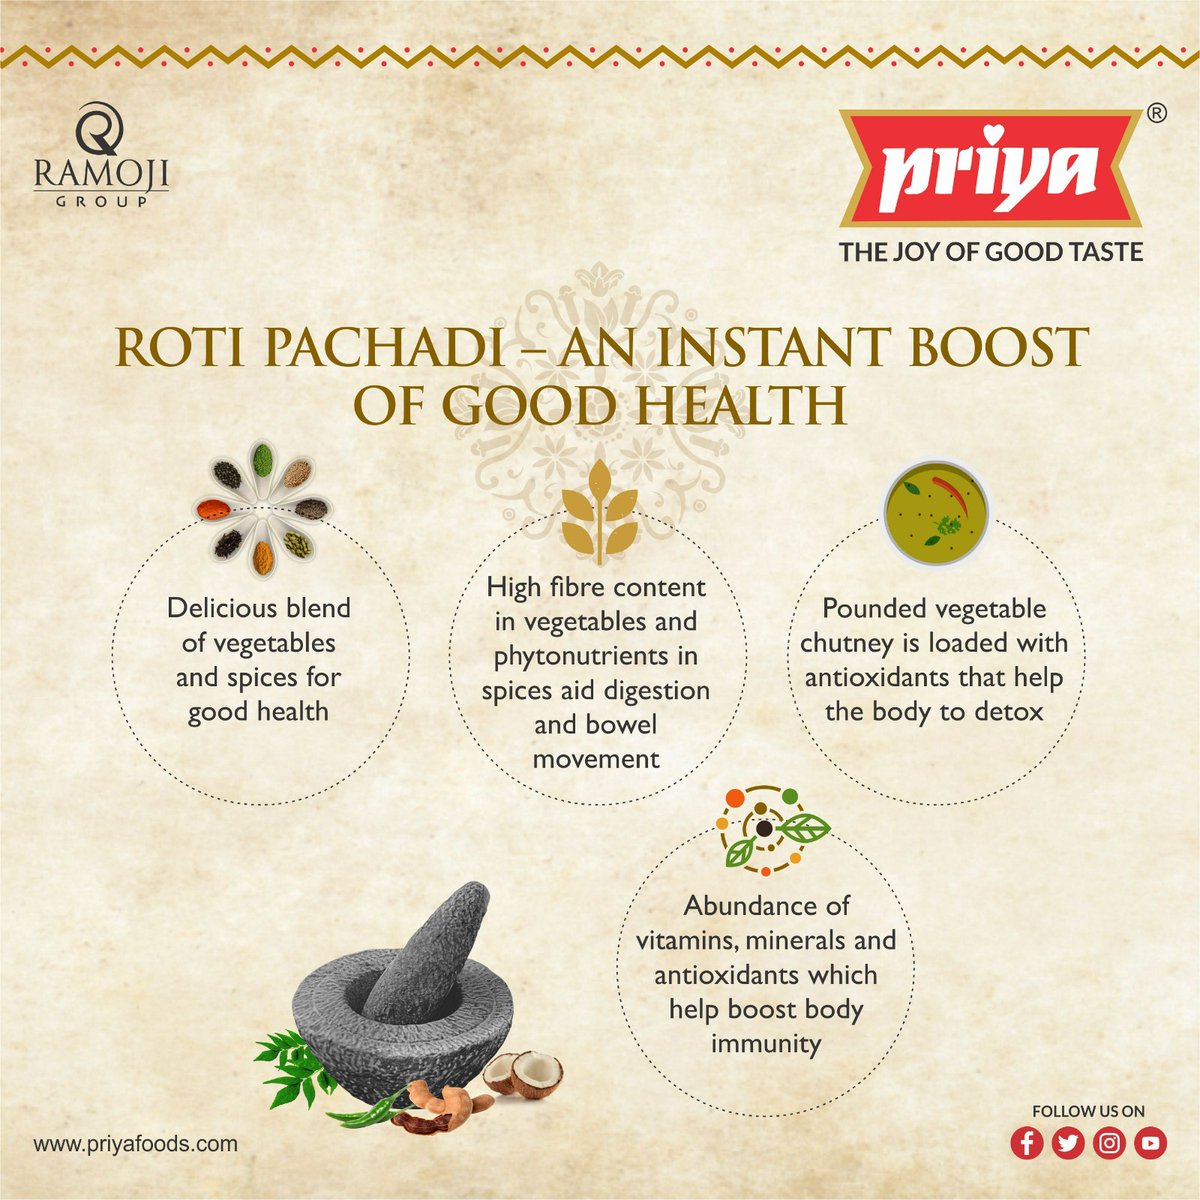 Boost Your Immunity and Energy Levels with Vegetable Roti Pachadi
Buy Now:  priyafoods.com/collections/ro…
#priyafoods #rotipachadi #pachadi #BoostYourImmunity #instantboost  #healthyfood #indianstylefood #tastyfood #priyapachadi #limittedoff #BuyNowOnline